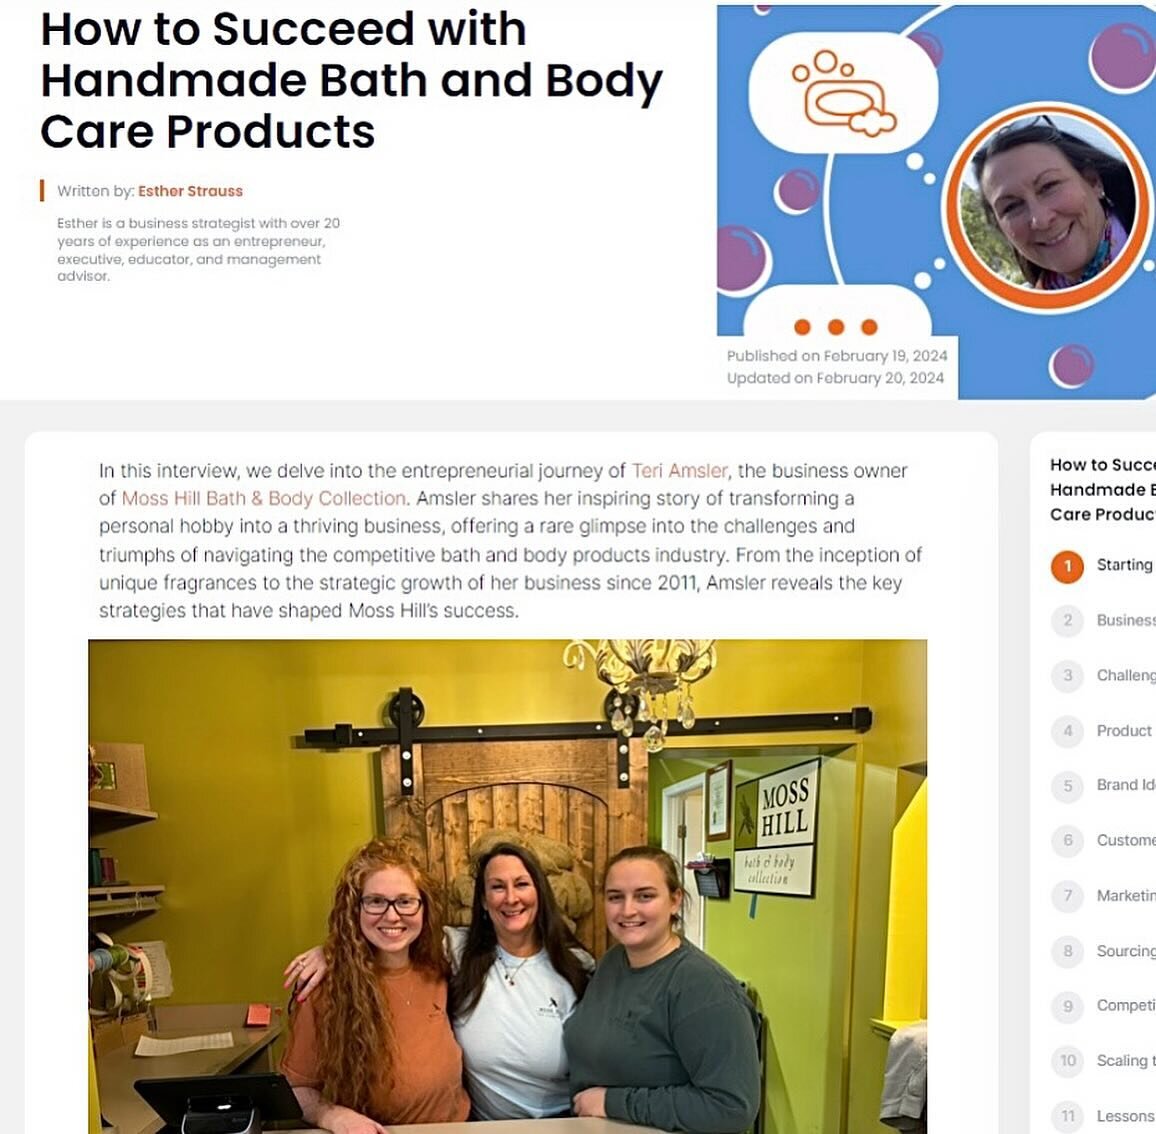 Teri was interviewed by Esther Strauss with Step by Step Business: How to Succeed with Handmade Bath and Body Care Products. We have the link to read it in our bio if you&rsquo;d like to learn more! We think Teri did a great job detailing the many di